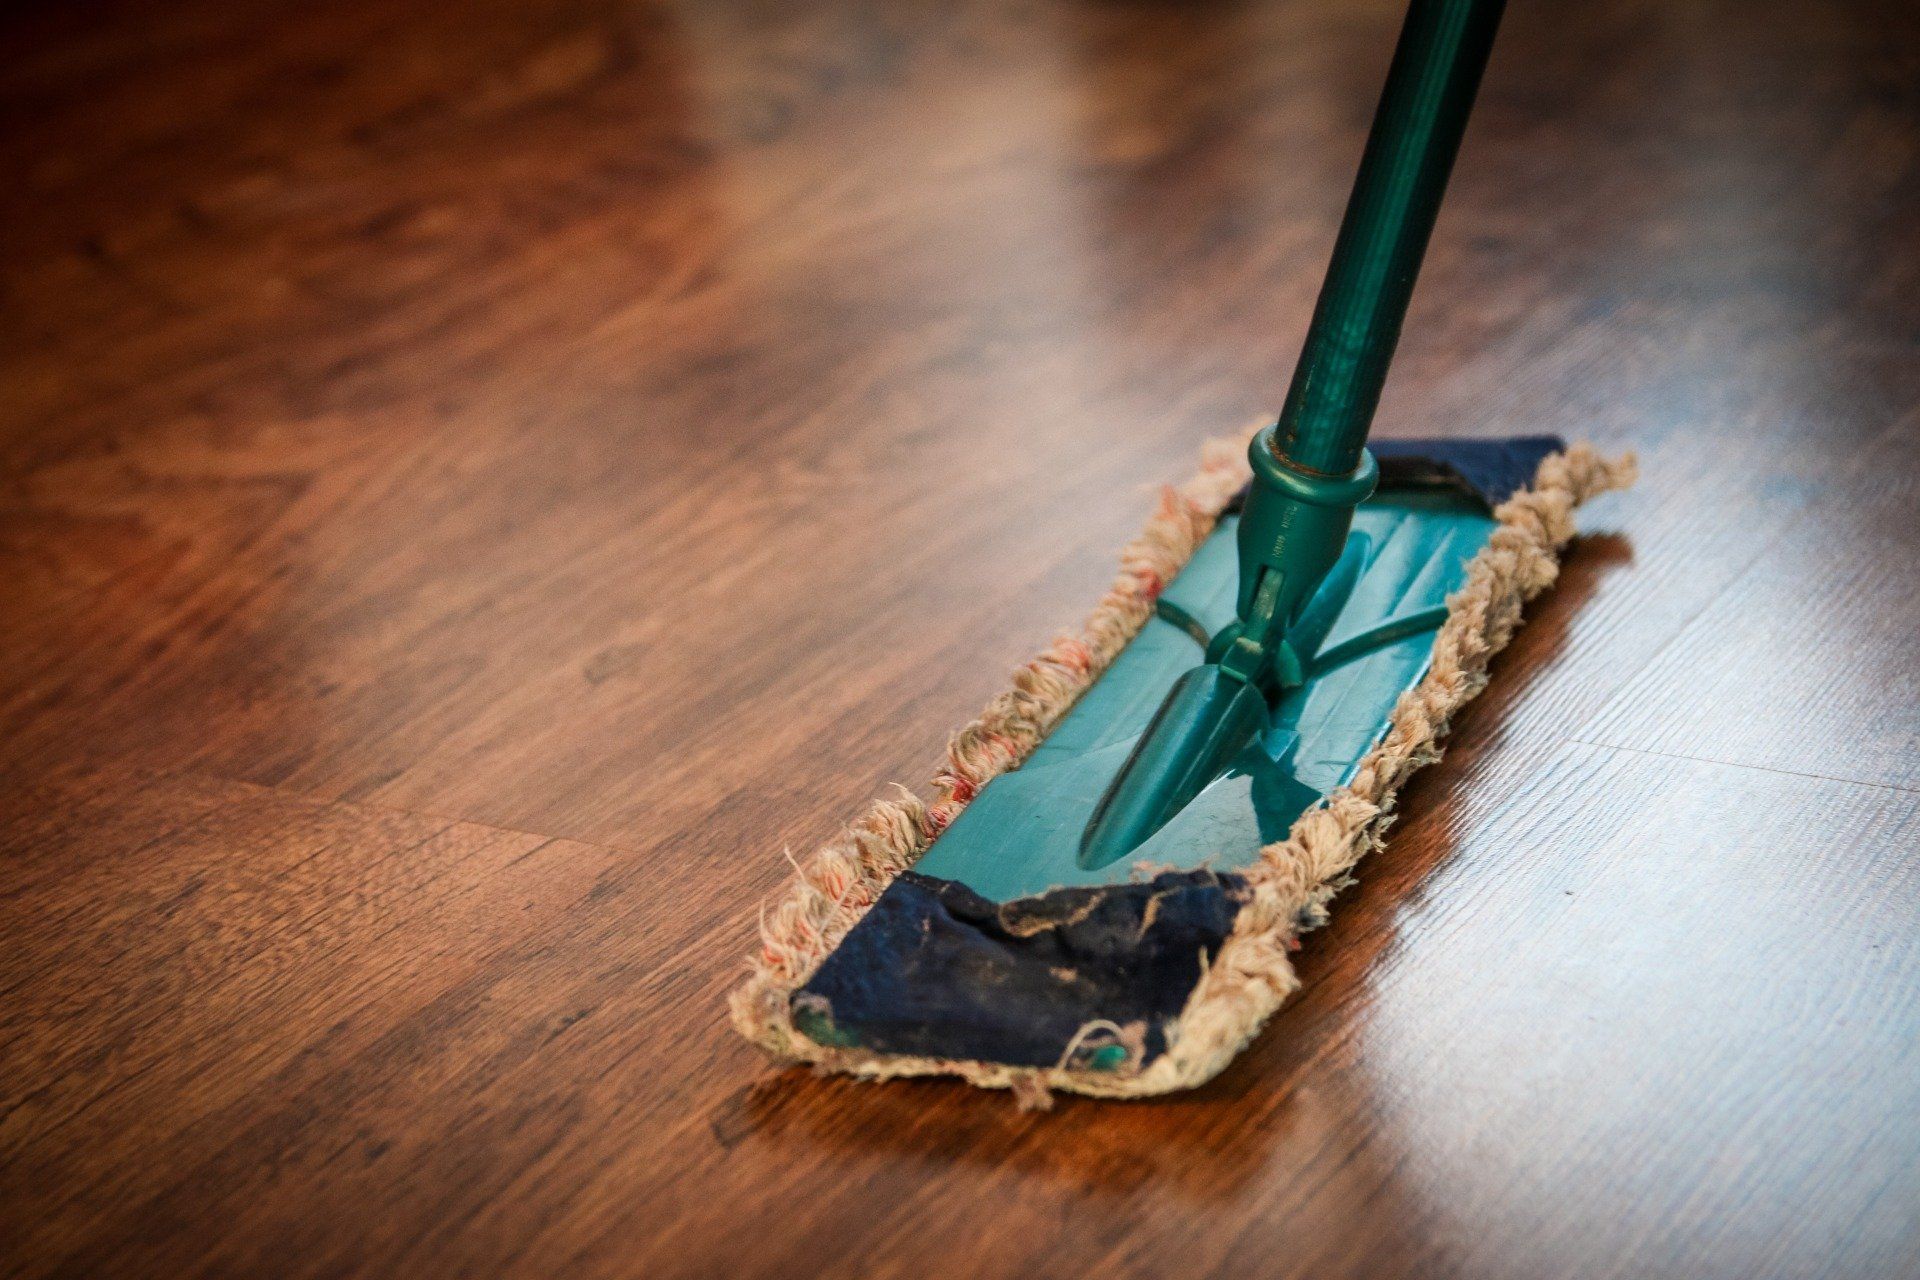 How to Clean Laminate Flooring